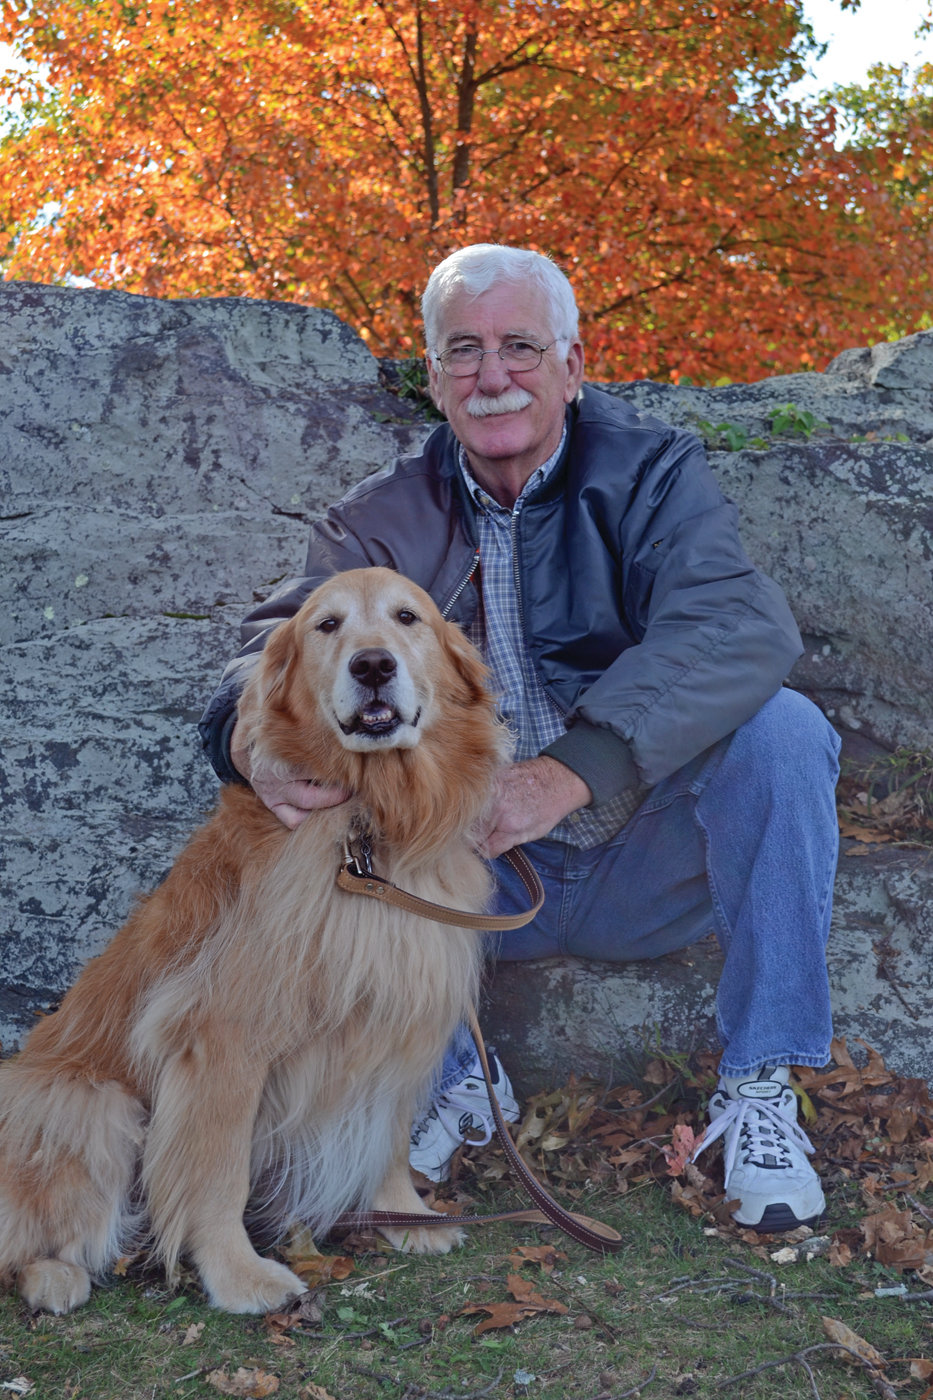 GOLDEN GAL: Jim Hanley with his trusty lady companion Gracie watched the celebration from a rock on the hill overlooking the park.